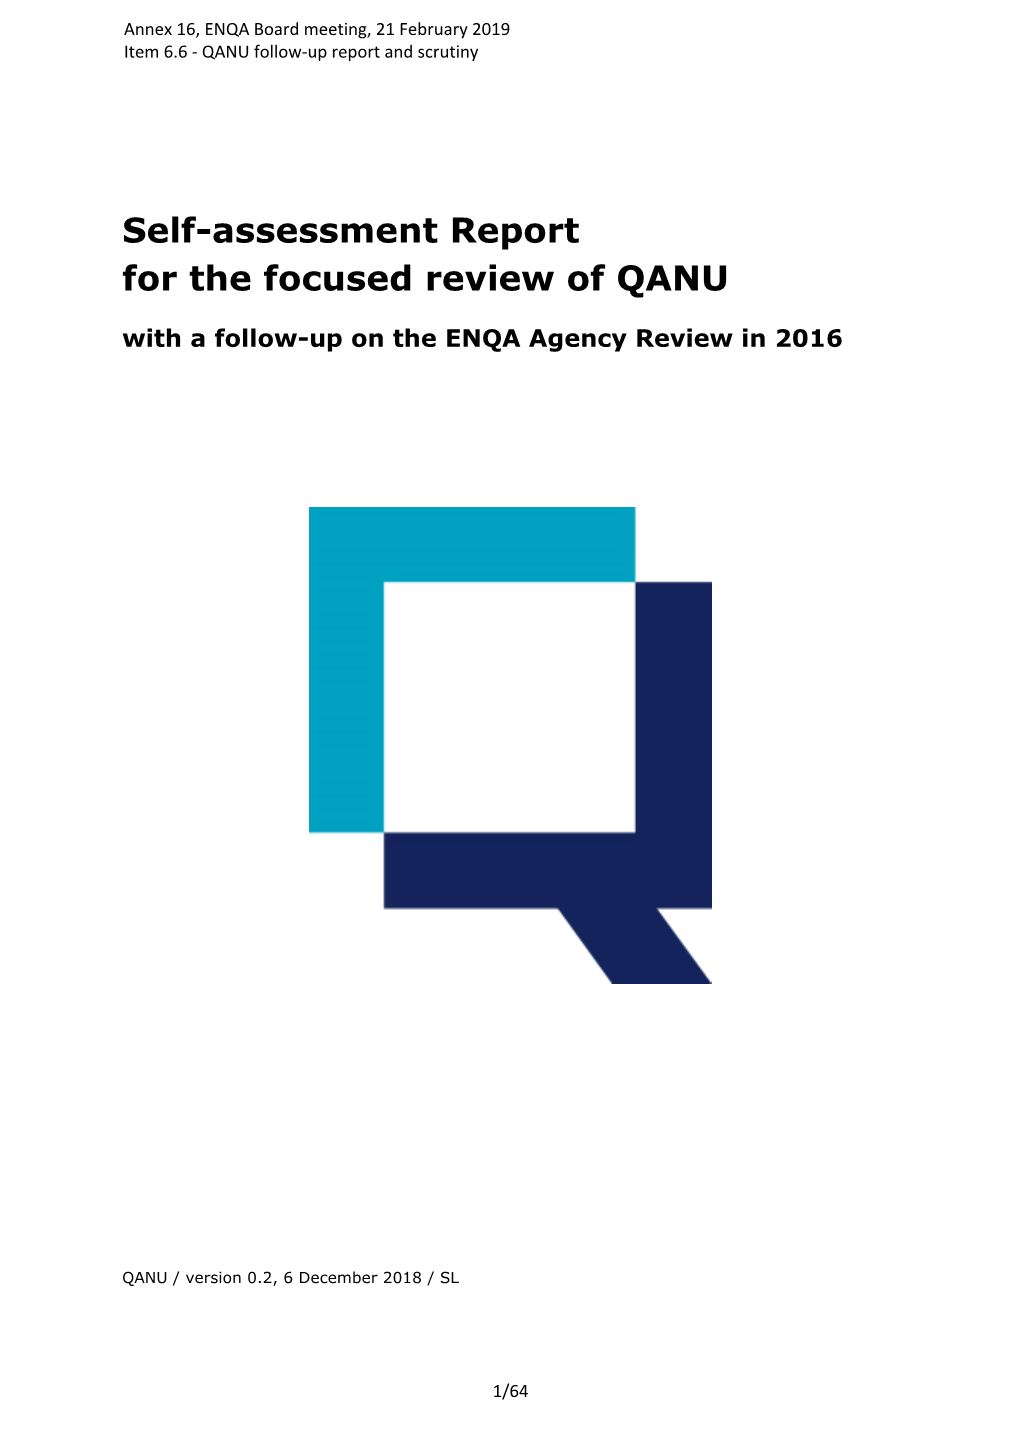 Self-Assessment Report for the Focused Review of QANU with a Follow-Up on the ENQA Agency Review in 2016